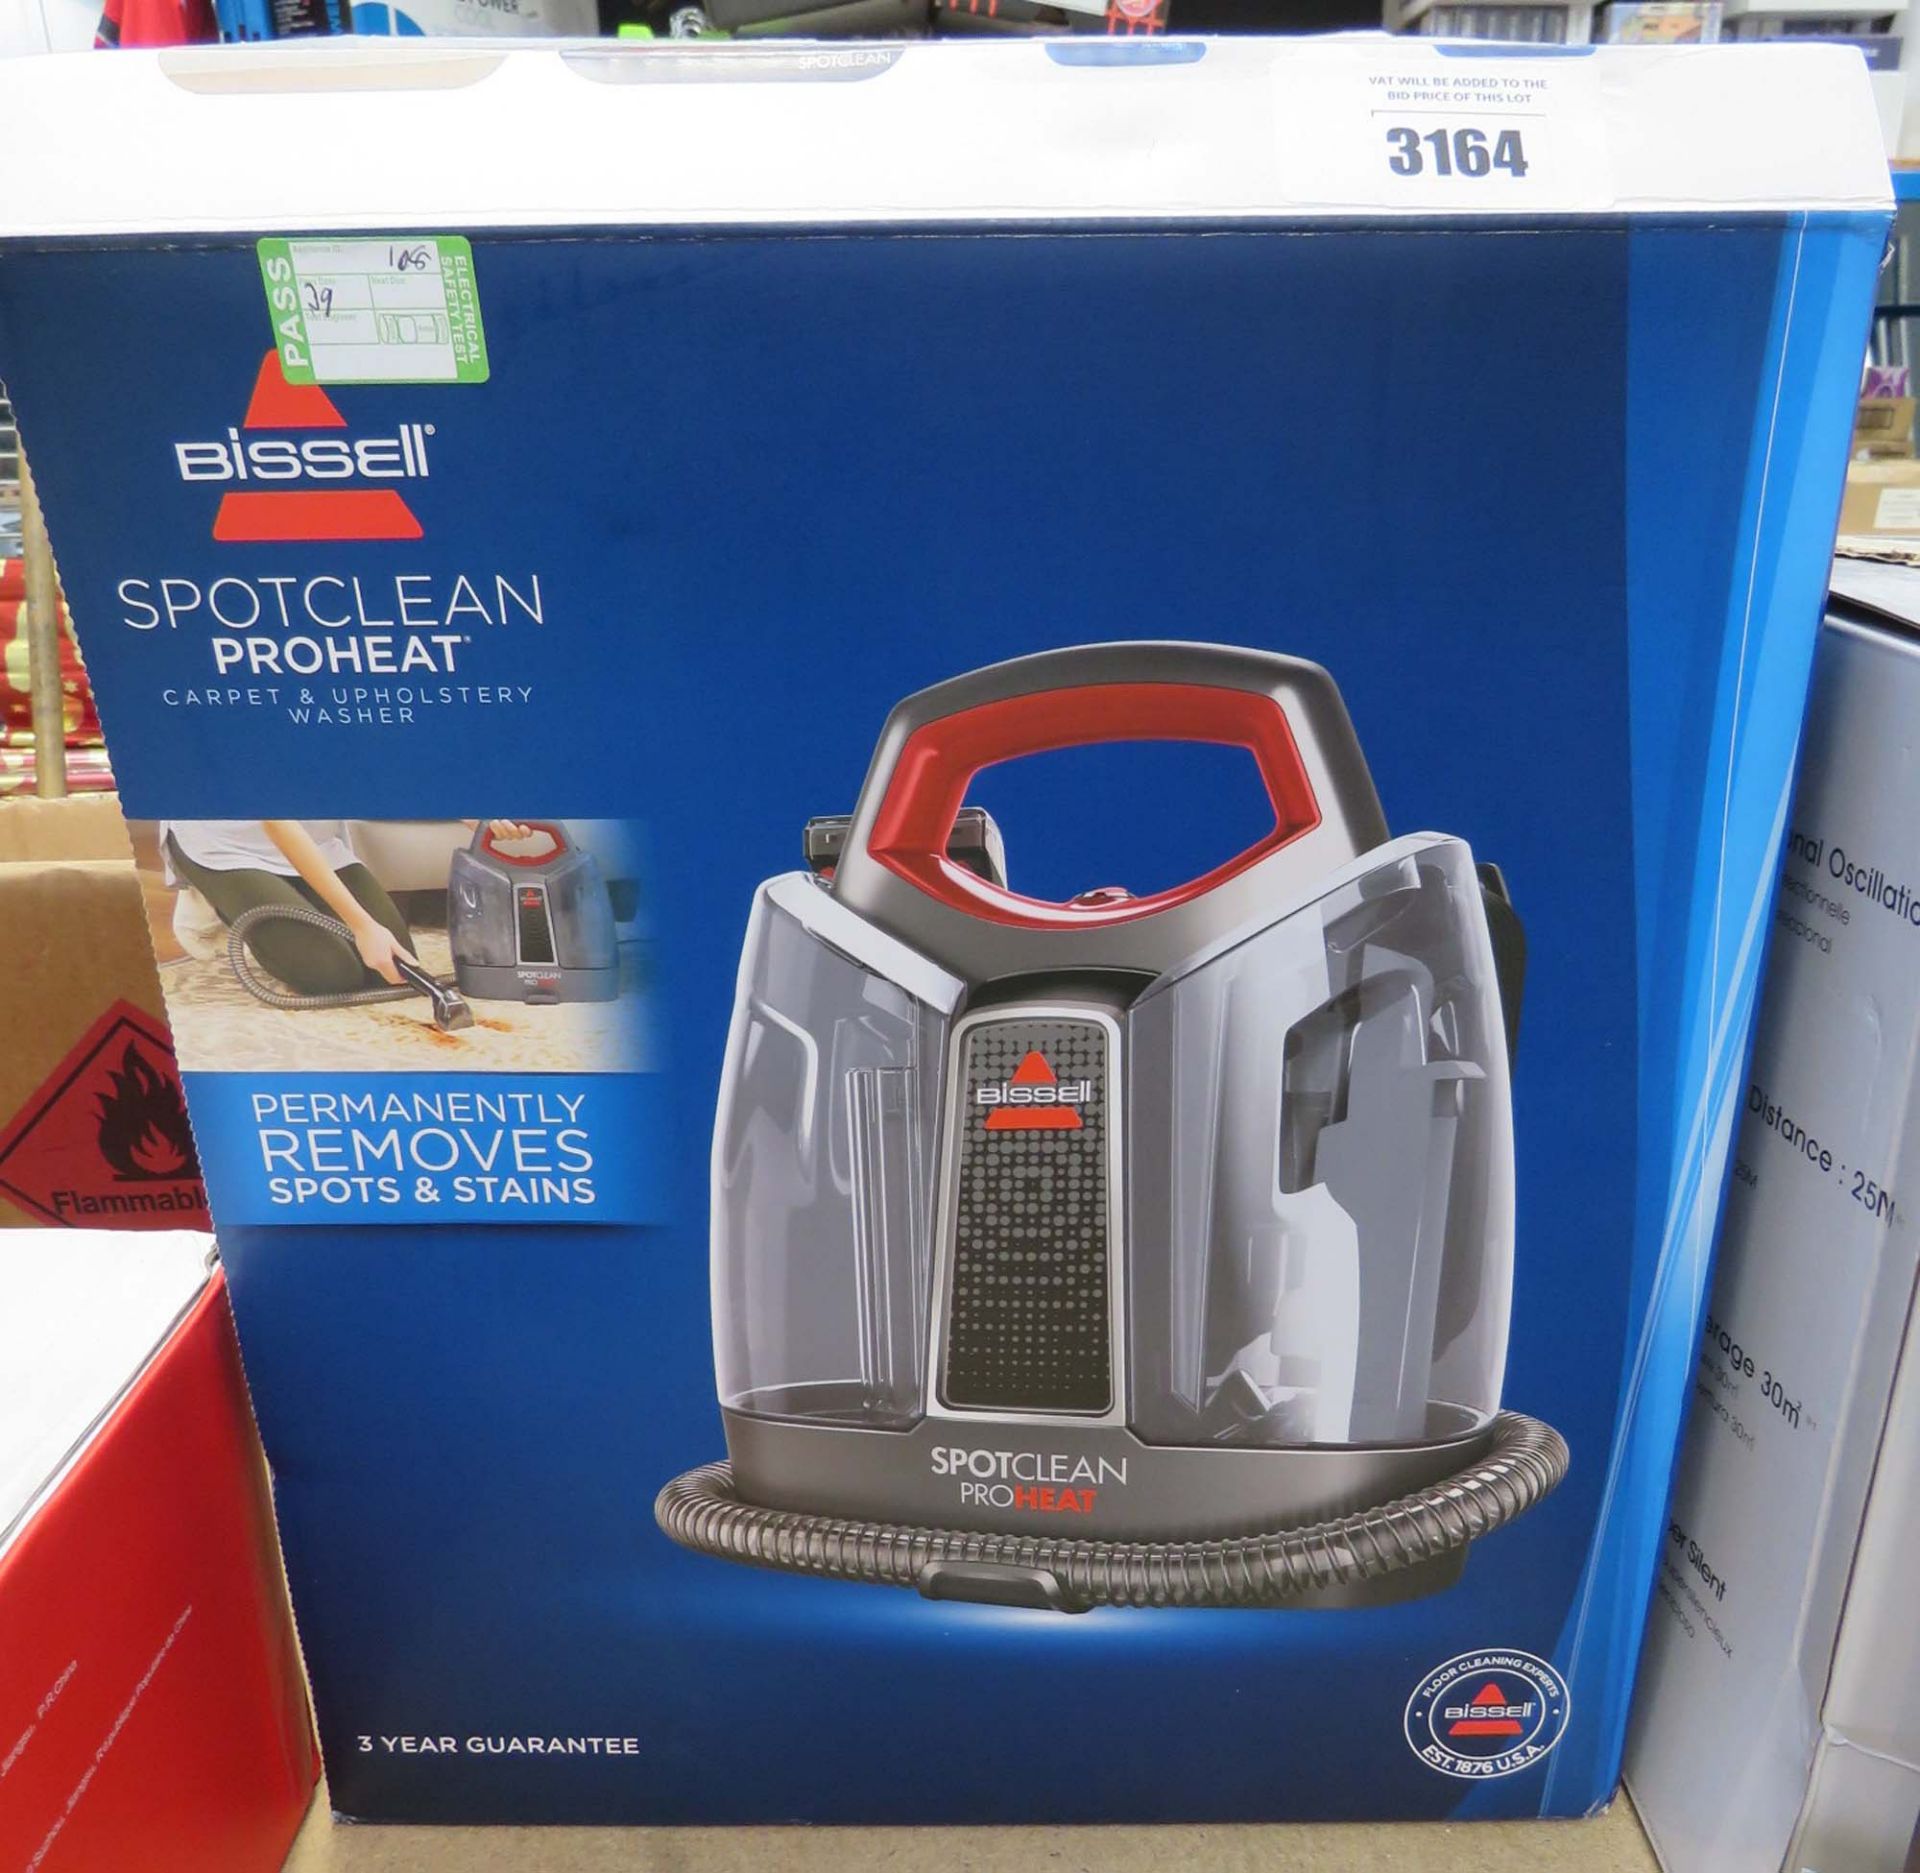 Bissell Spot Clean Pro Heat carpet and upholstery cleaner